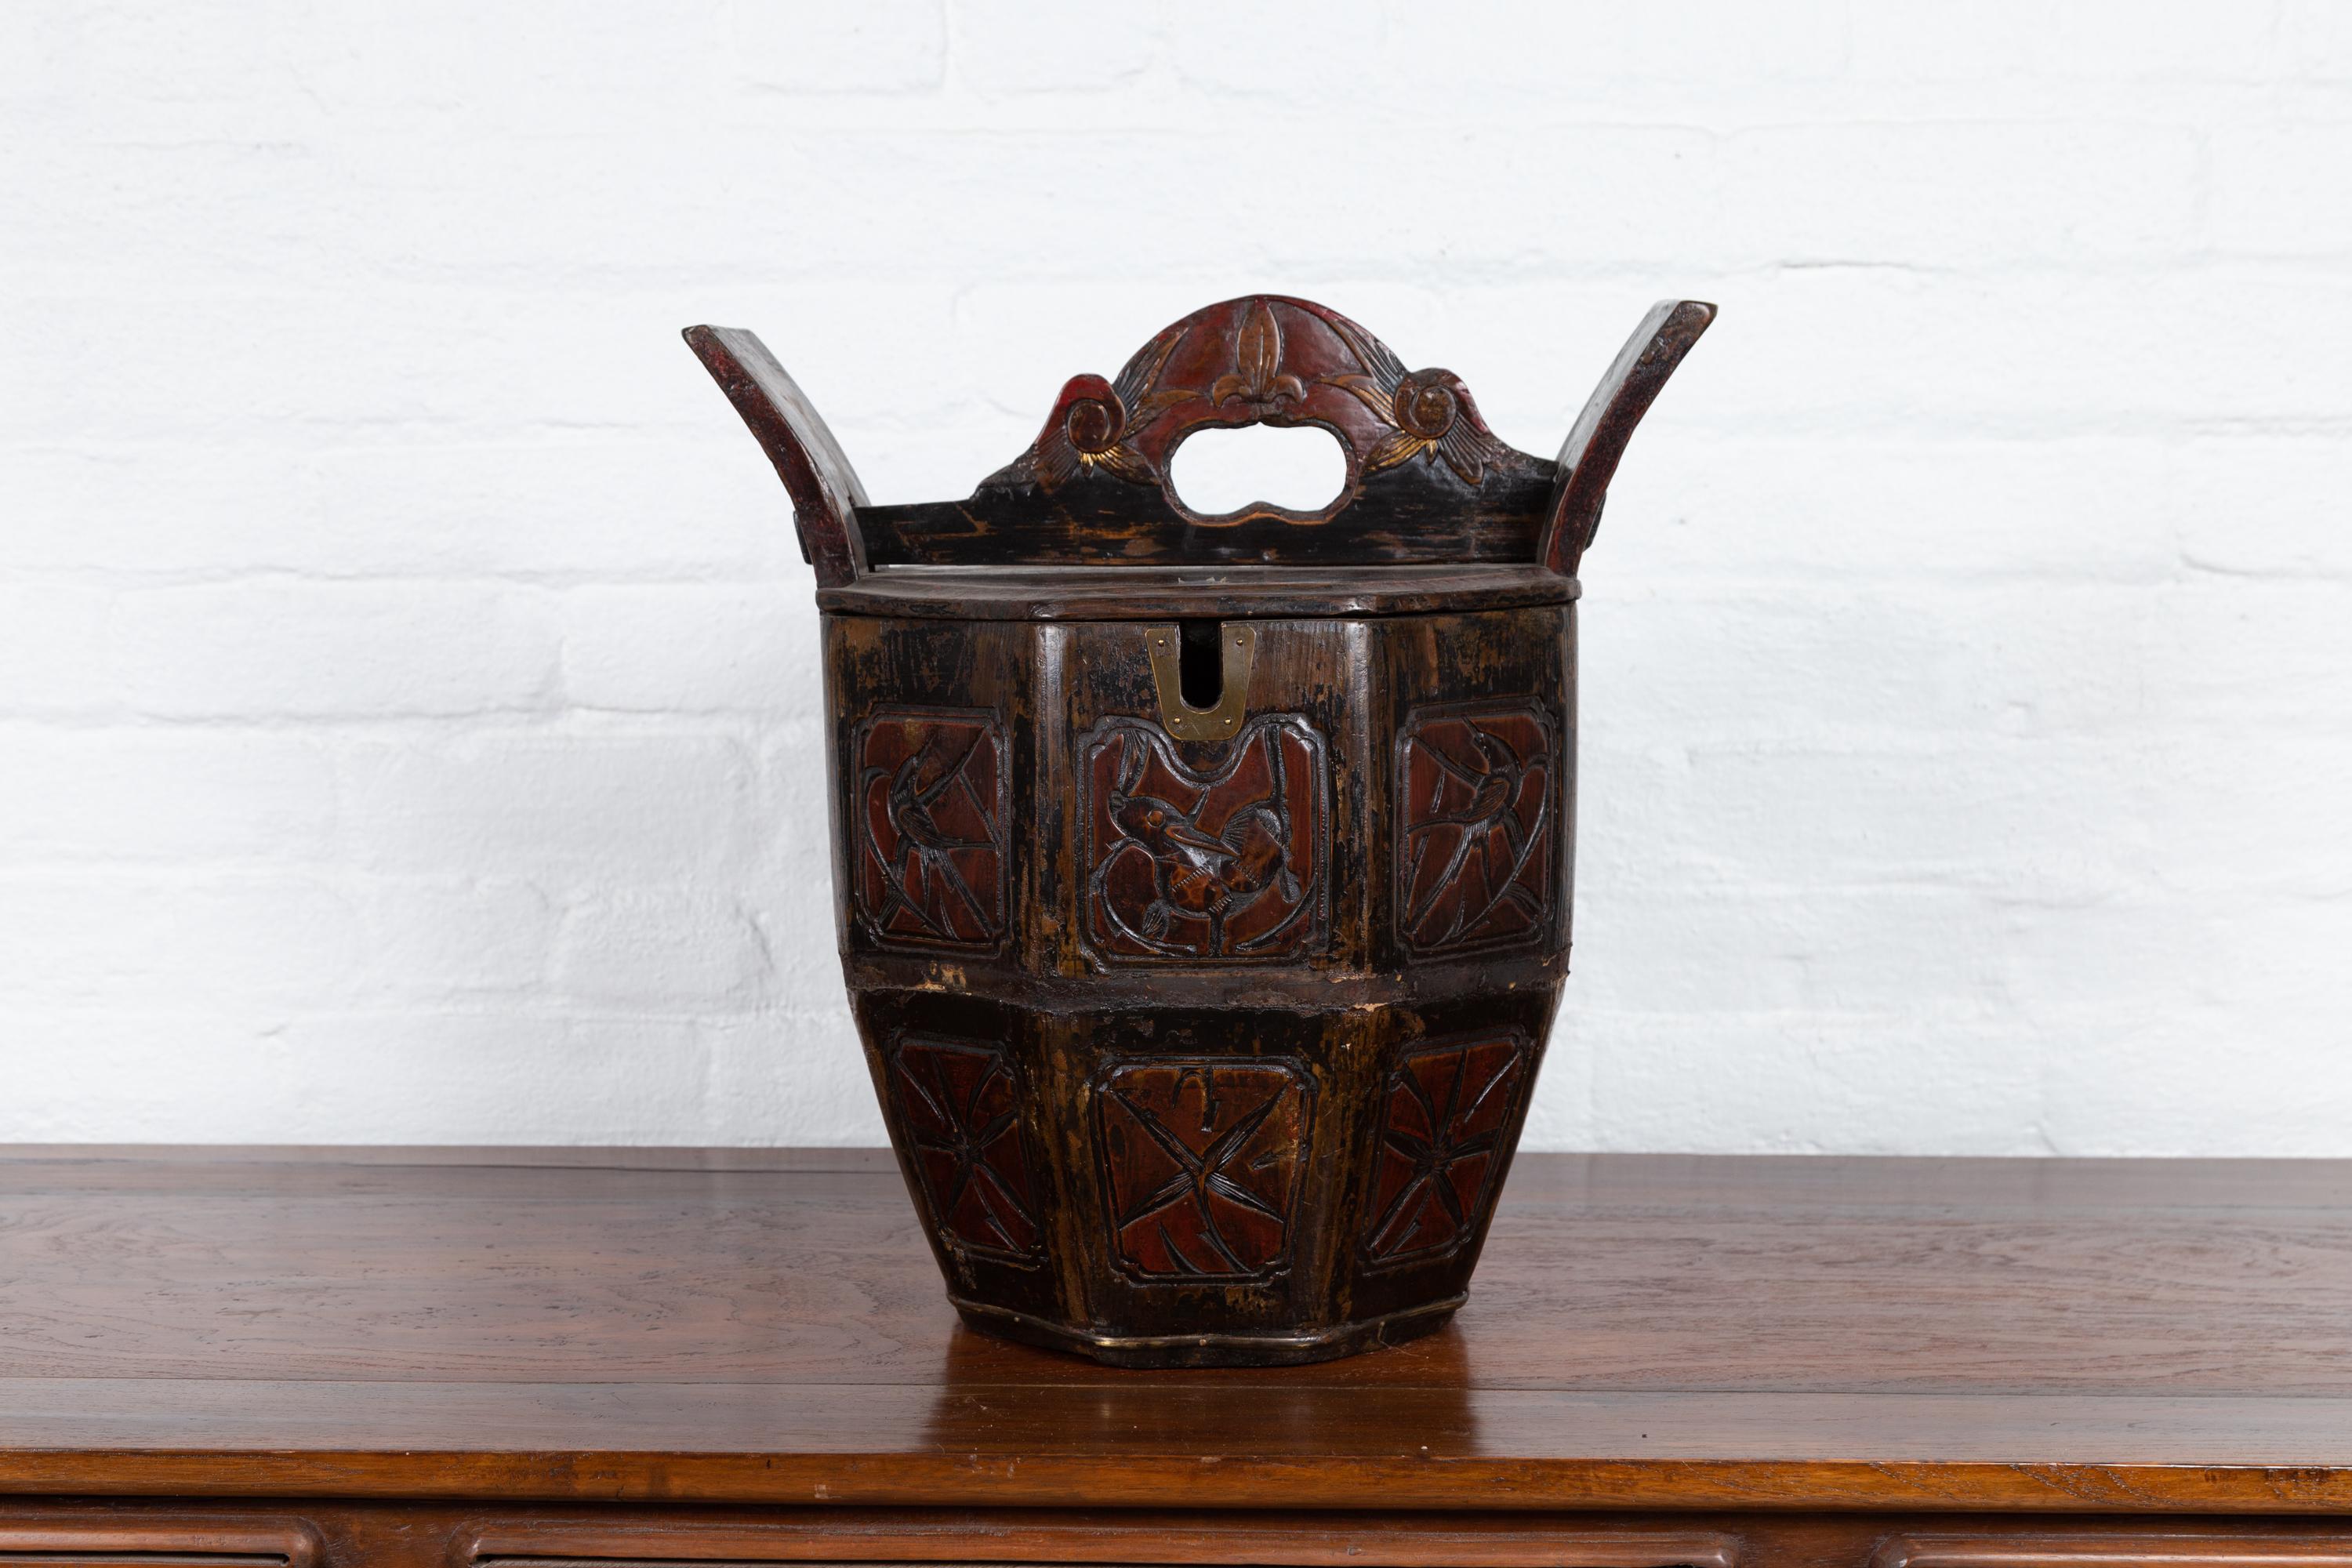 An antique Chinese wedding box from the early 20th century with handle, curving supports, animals and foliage motifs. Born in China during the early years of the 20th century, this charming wedding box features an hexagonal top, flanked